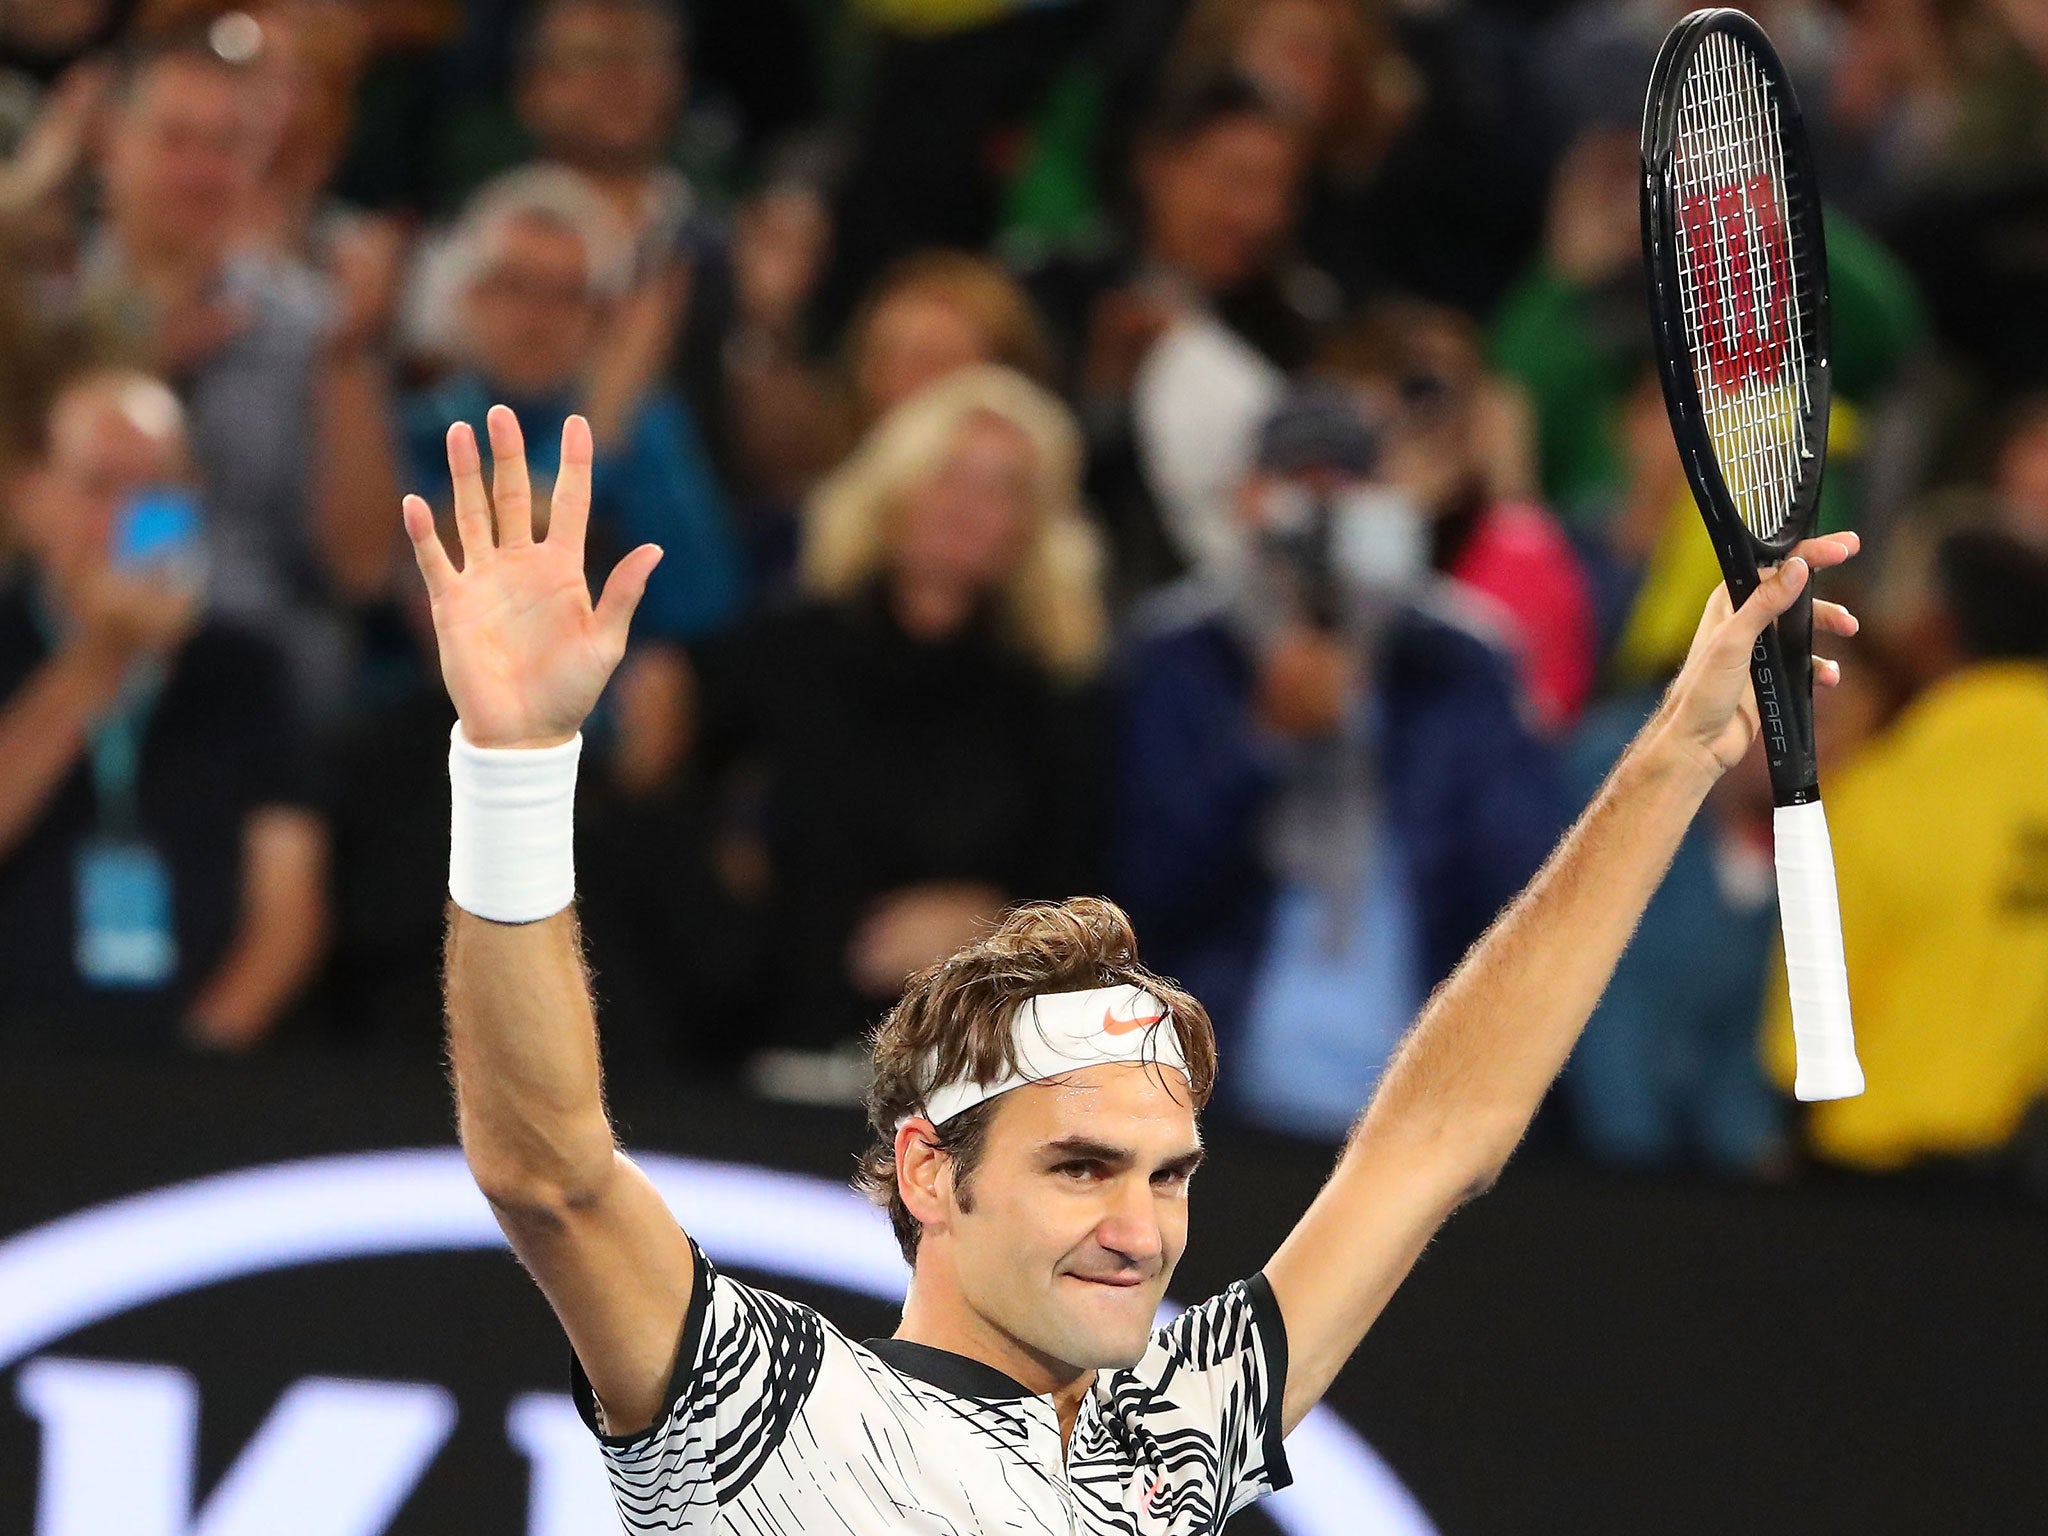 Federer continues to defy logic